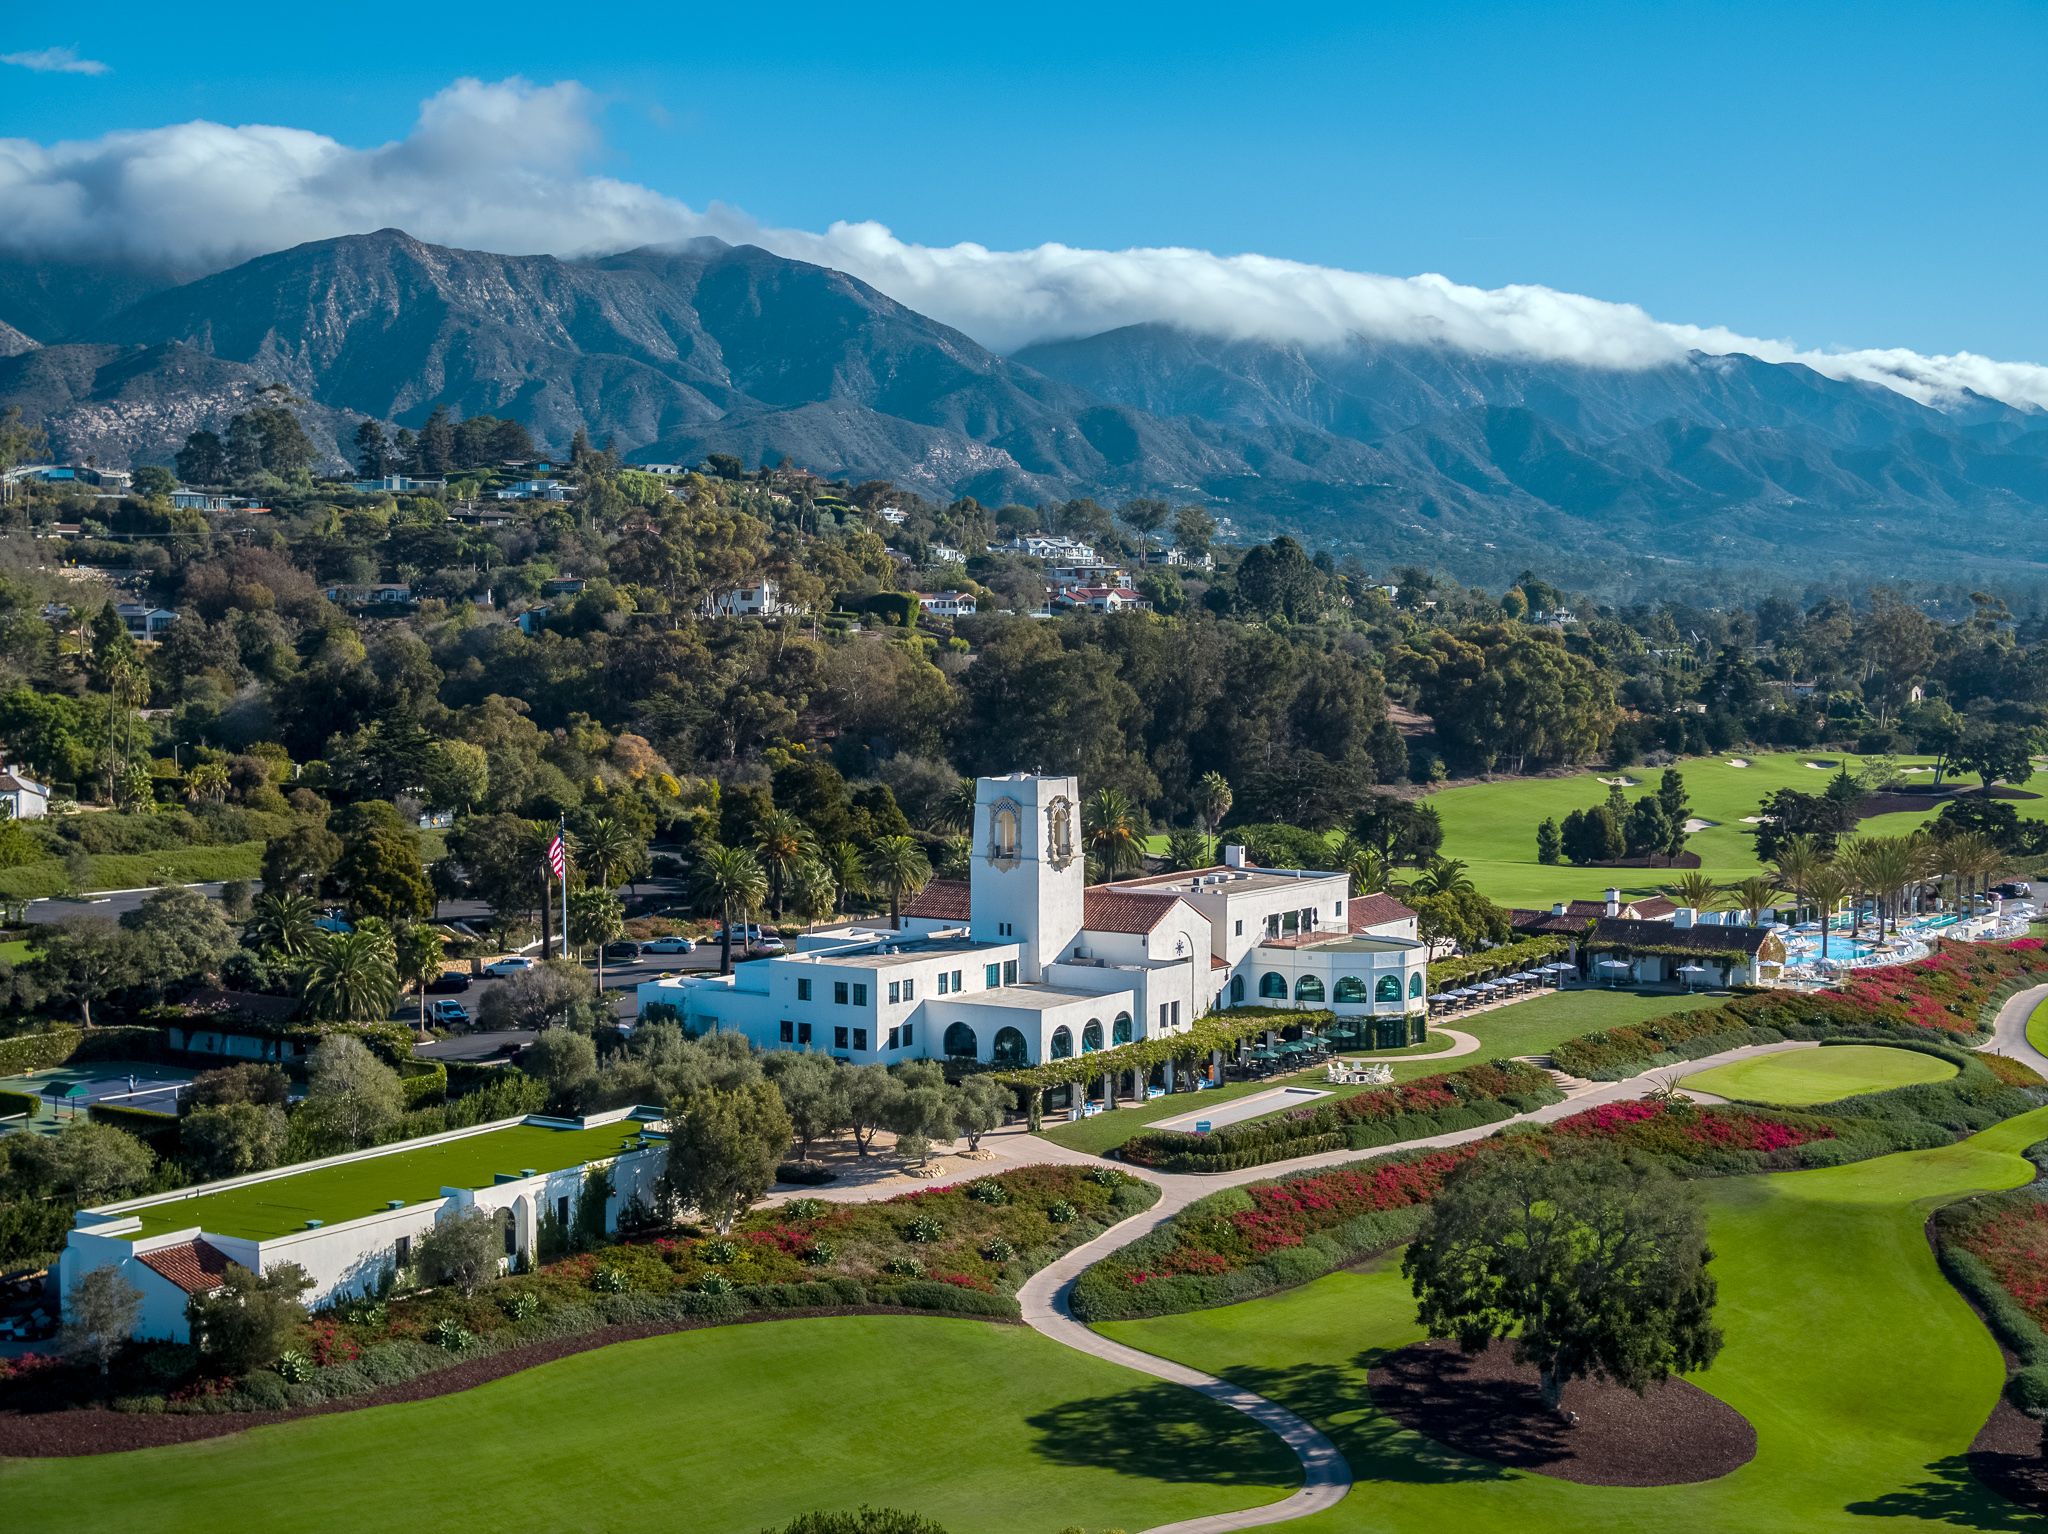 A birds eye view of the Montecito Club, with the large white clubhouse sitting amidst emerald green golf course, trees, and mountains and blue sky in the background.